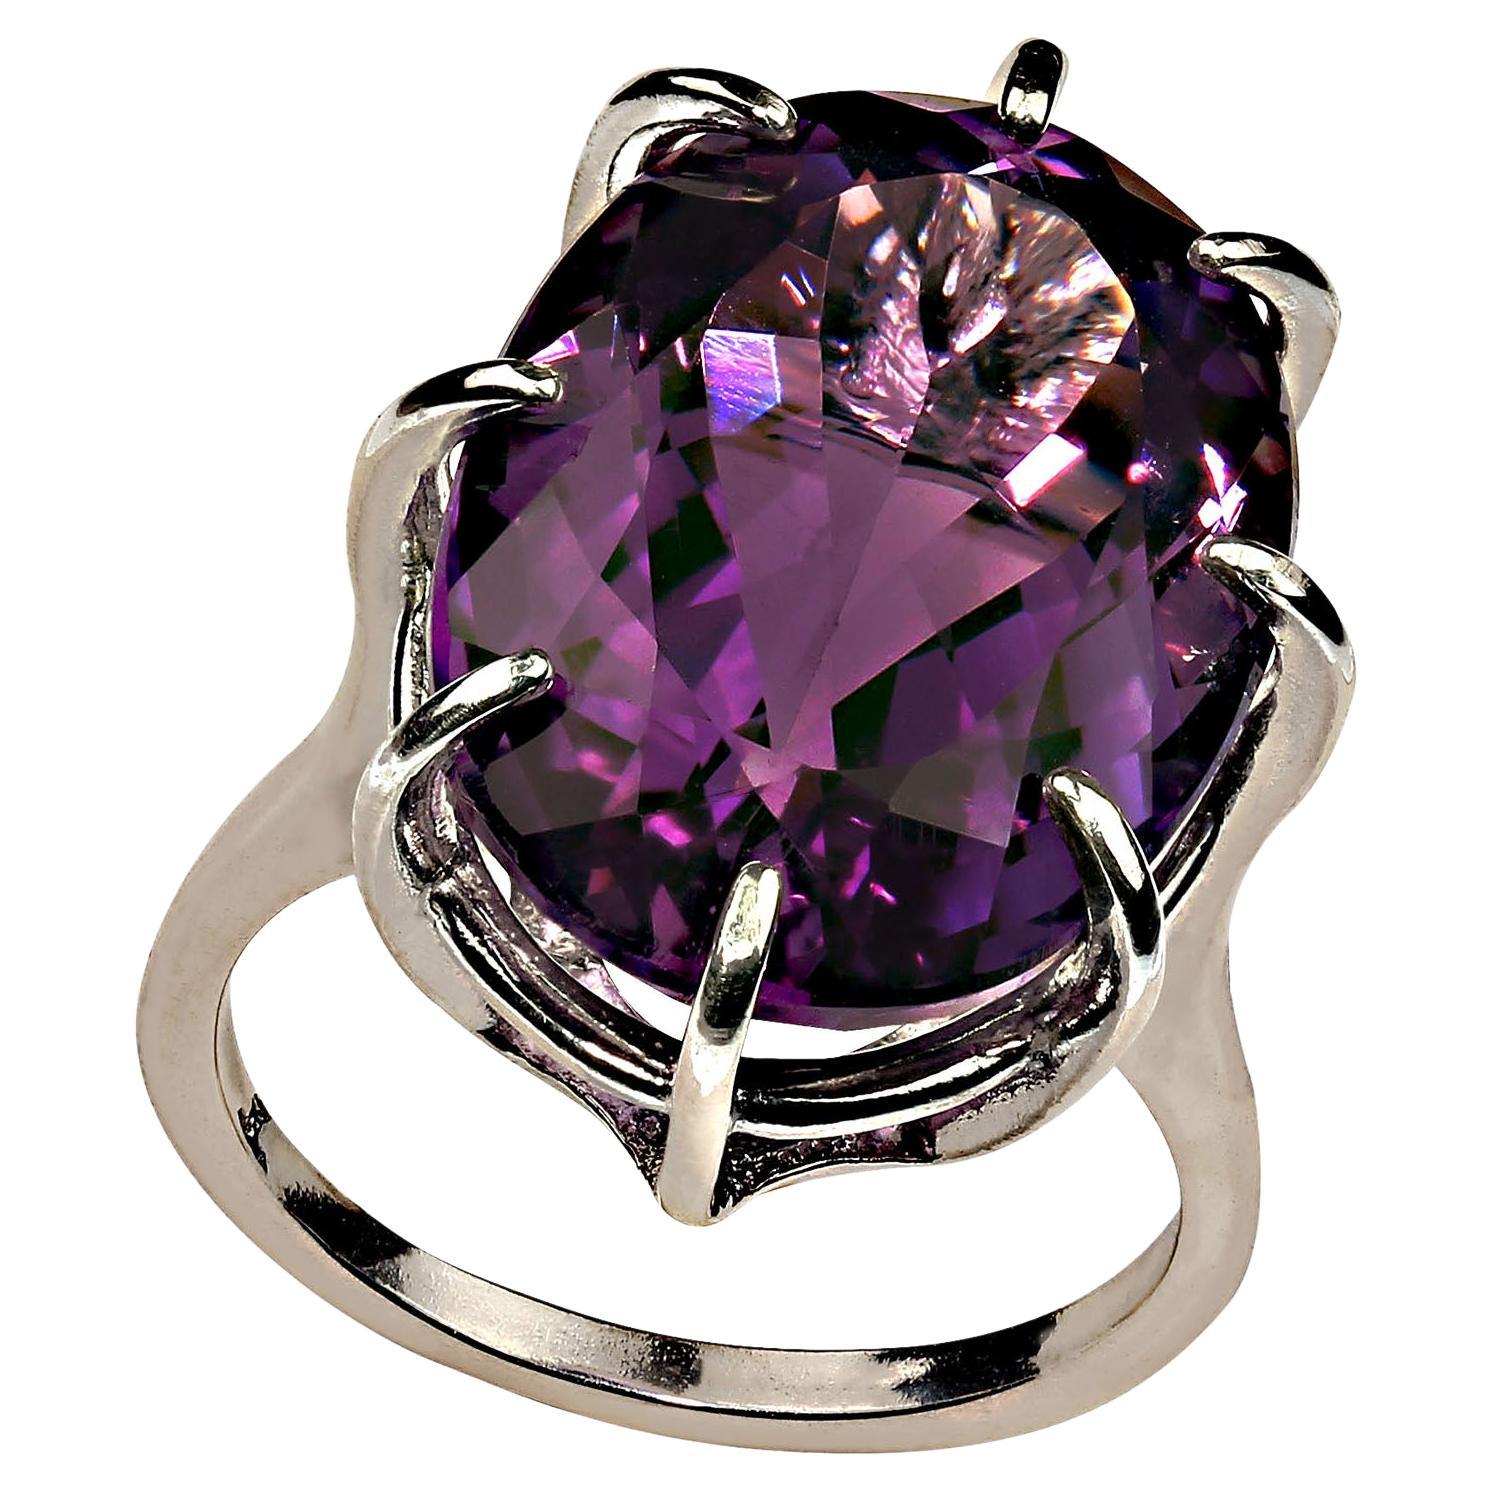 Sparkling oval Amethyst, 14.43 carats, medium color with decidly brilliant pink flash set in a Sterling Silver basket style setting with 8 prongs. Sizable 7. This gorgeous gemstone comes from our favorite supplier up in the mountains outside of Rio